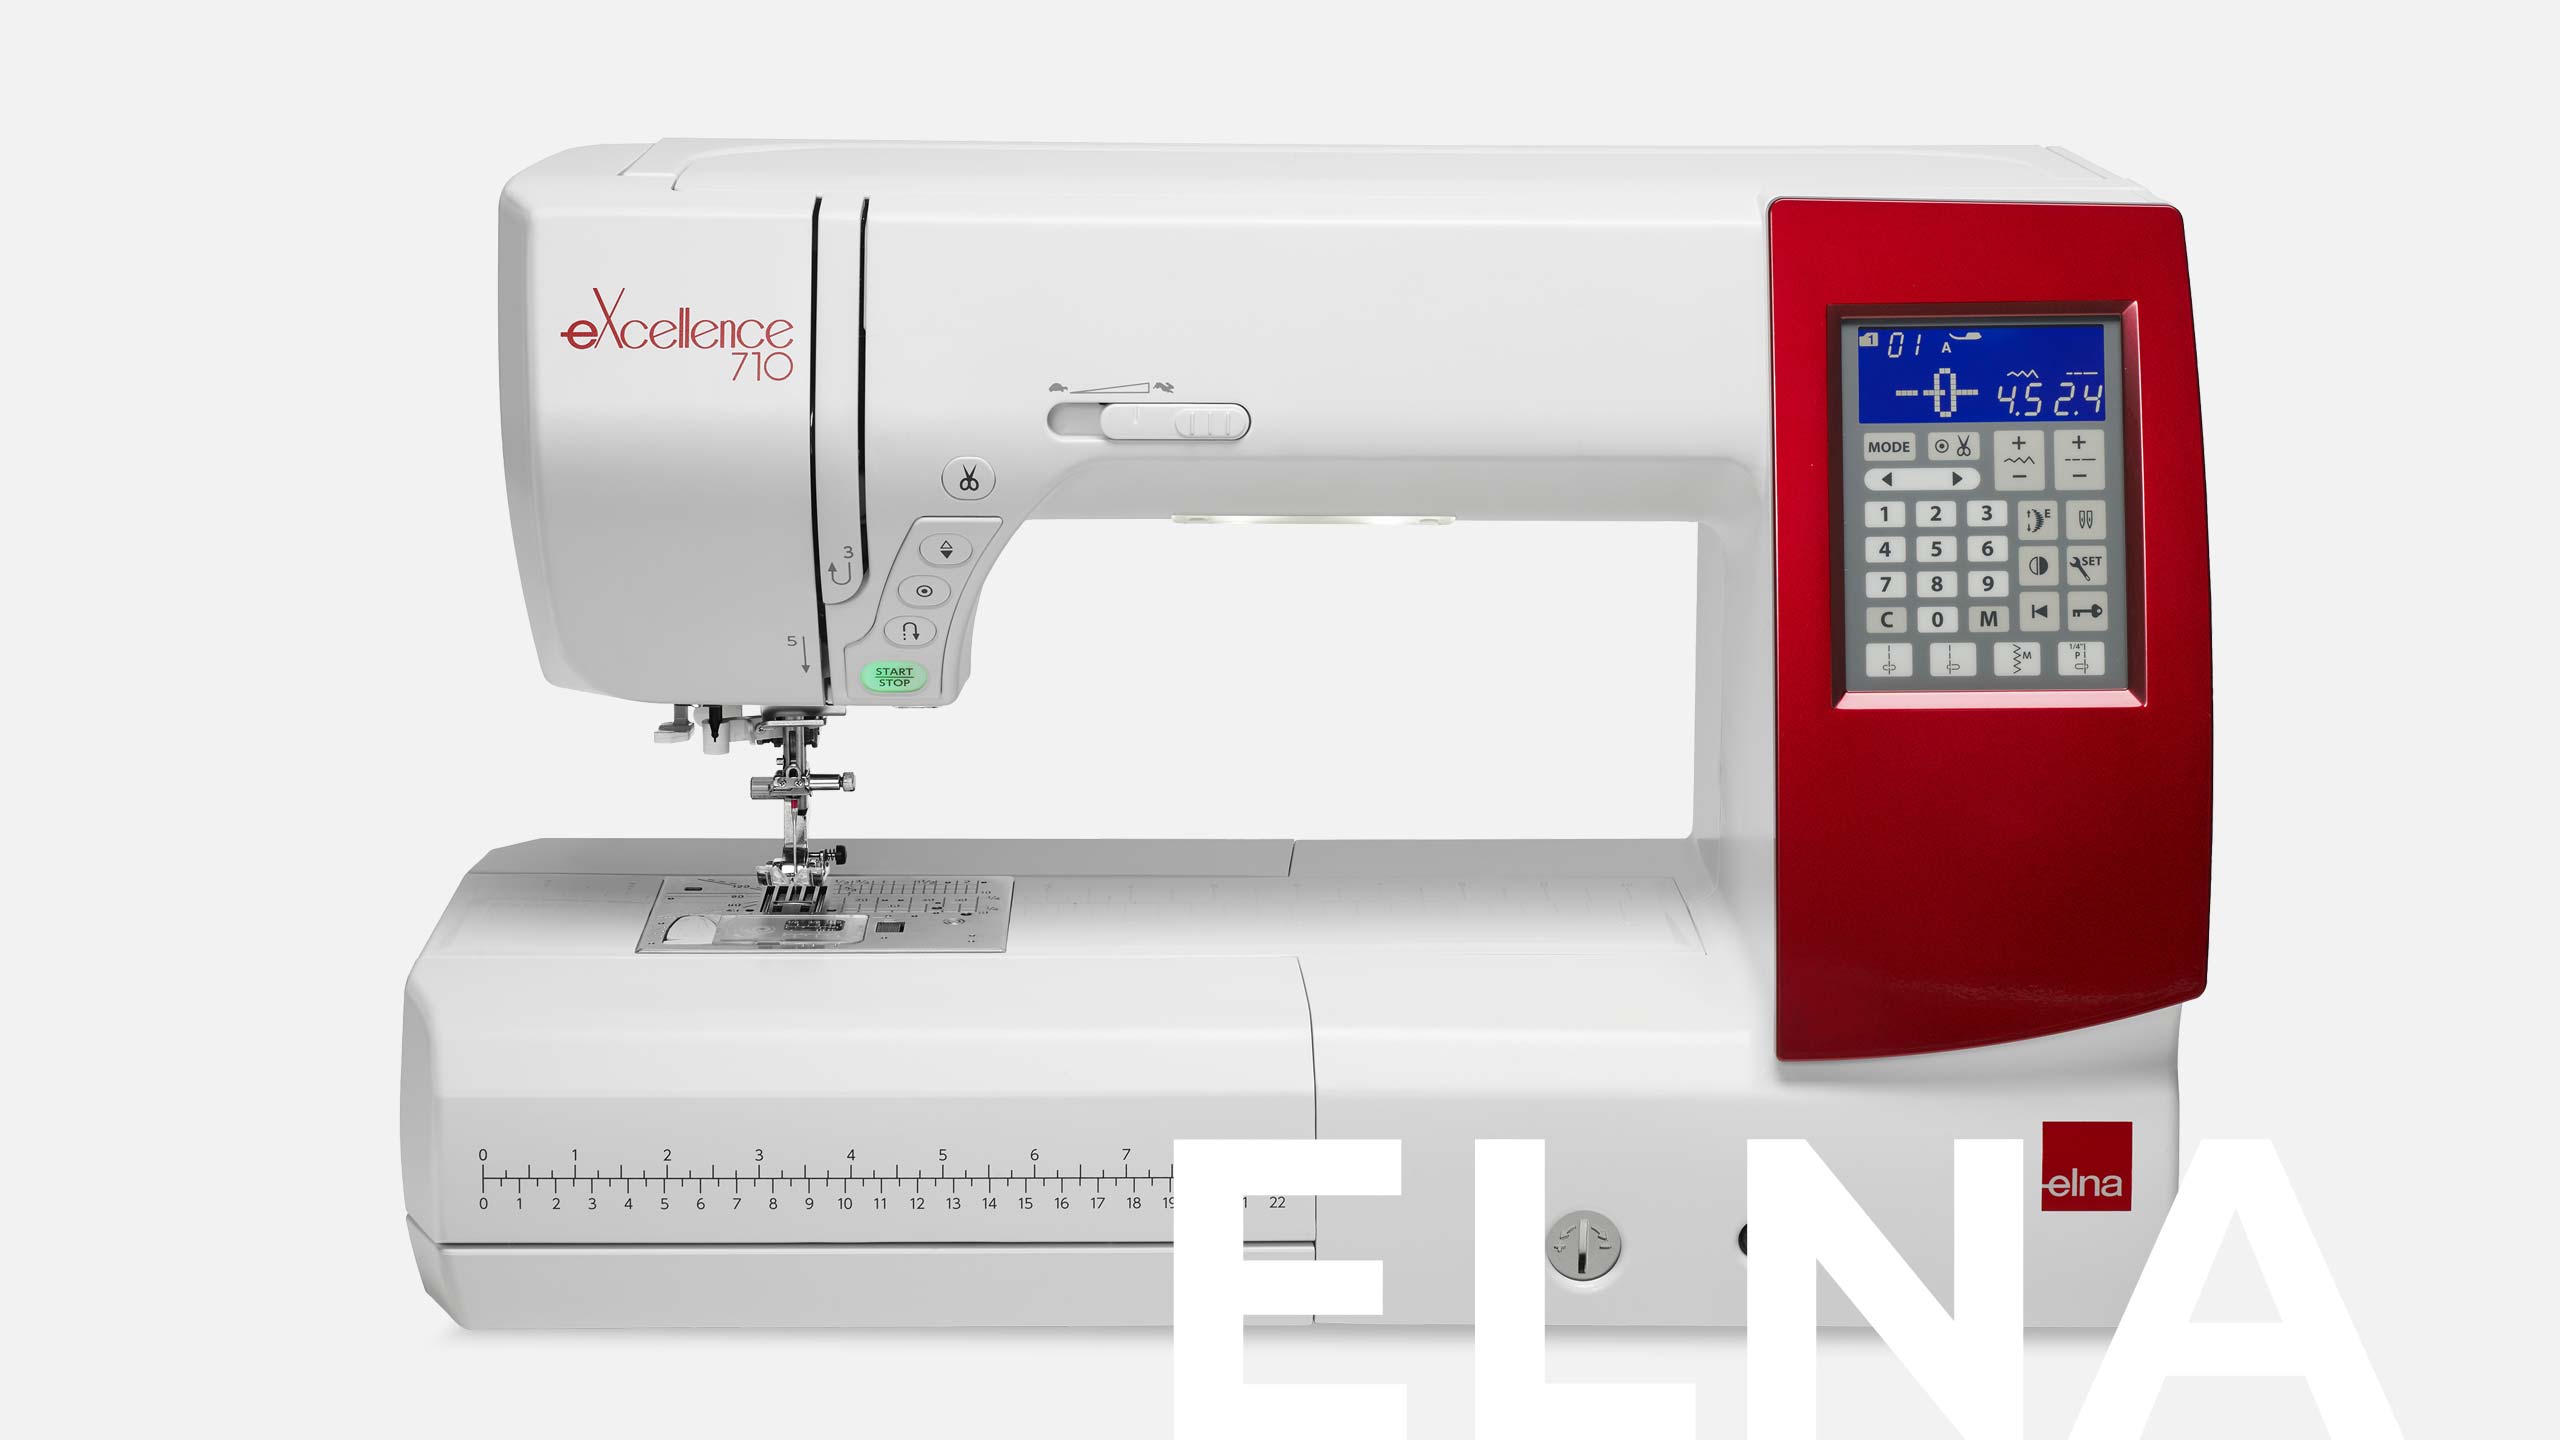 Elna eXcellence 710